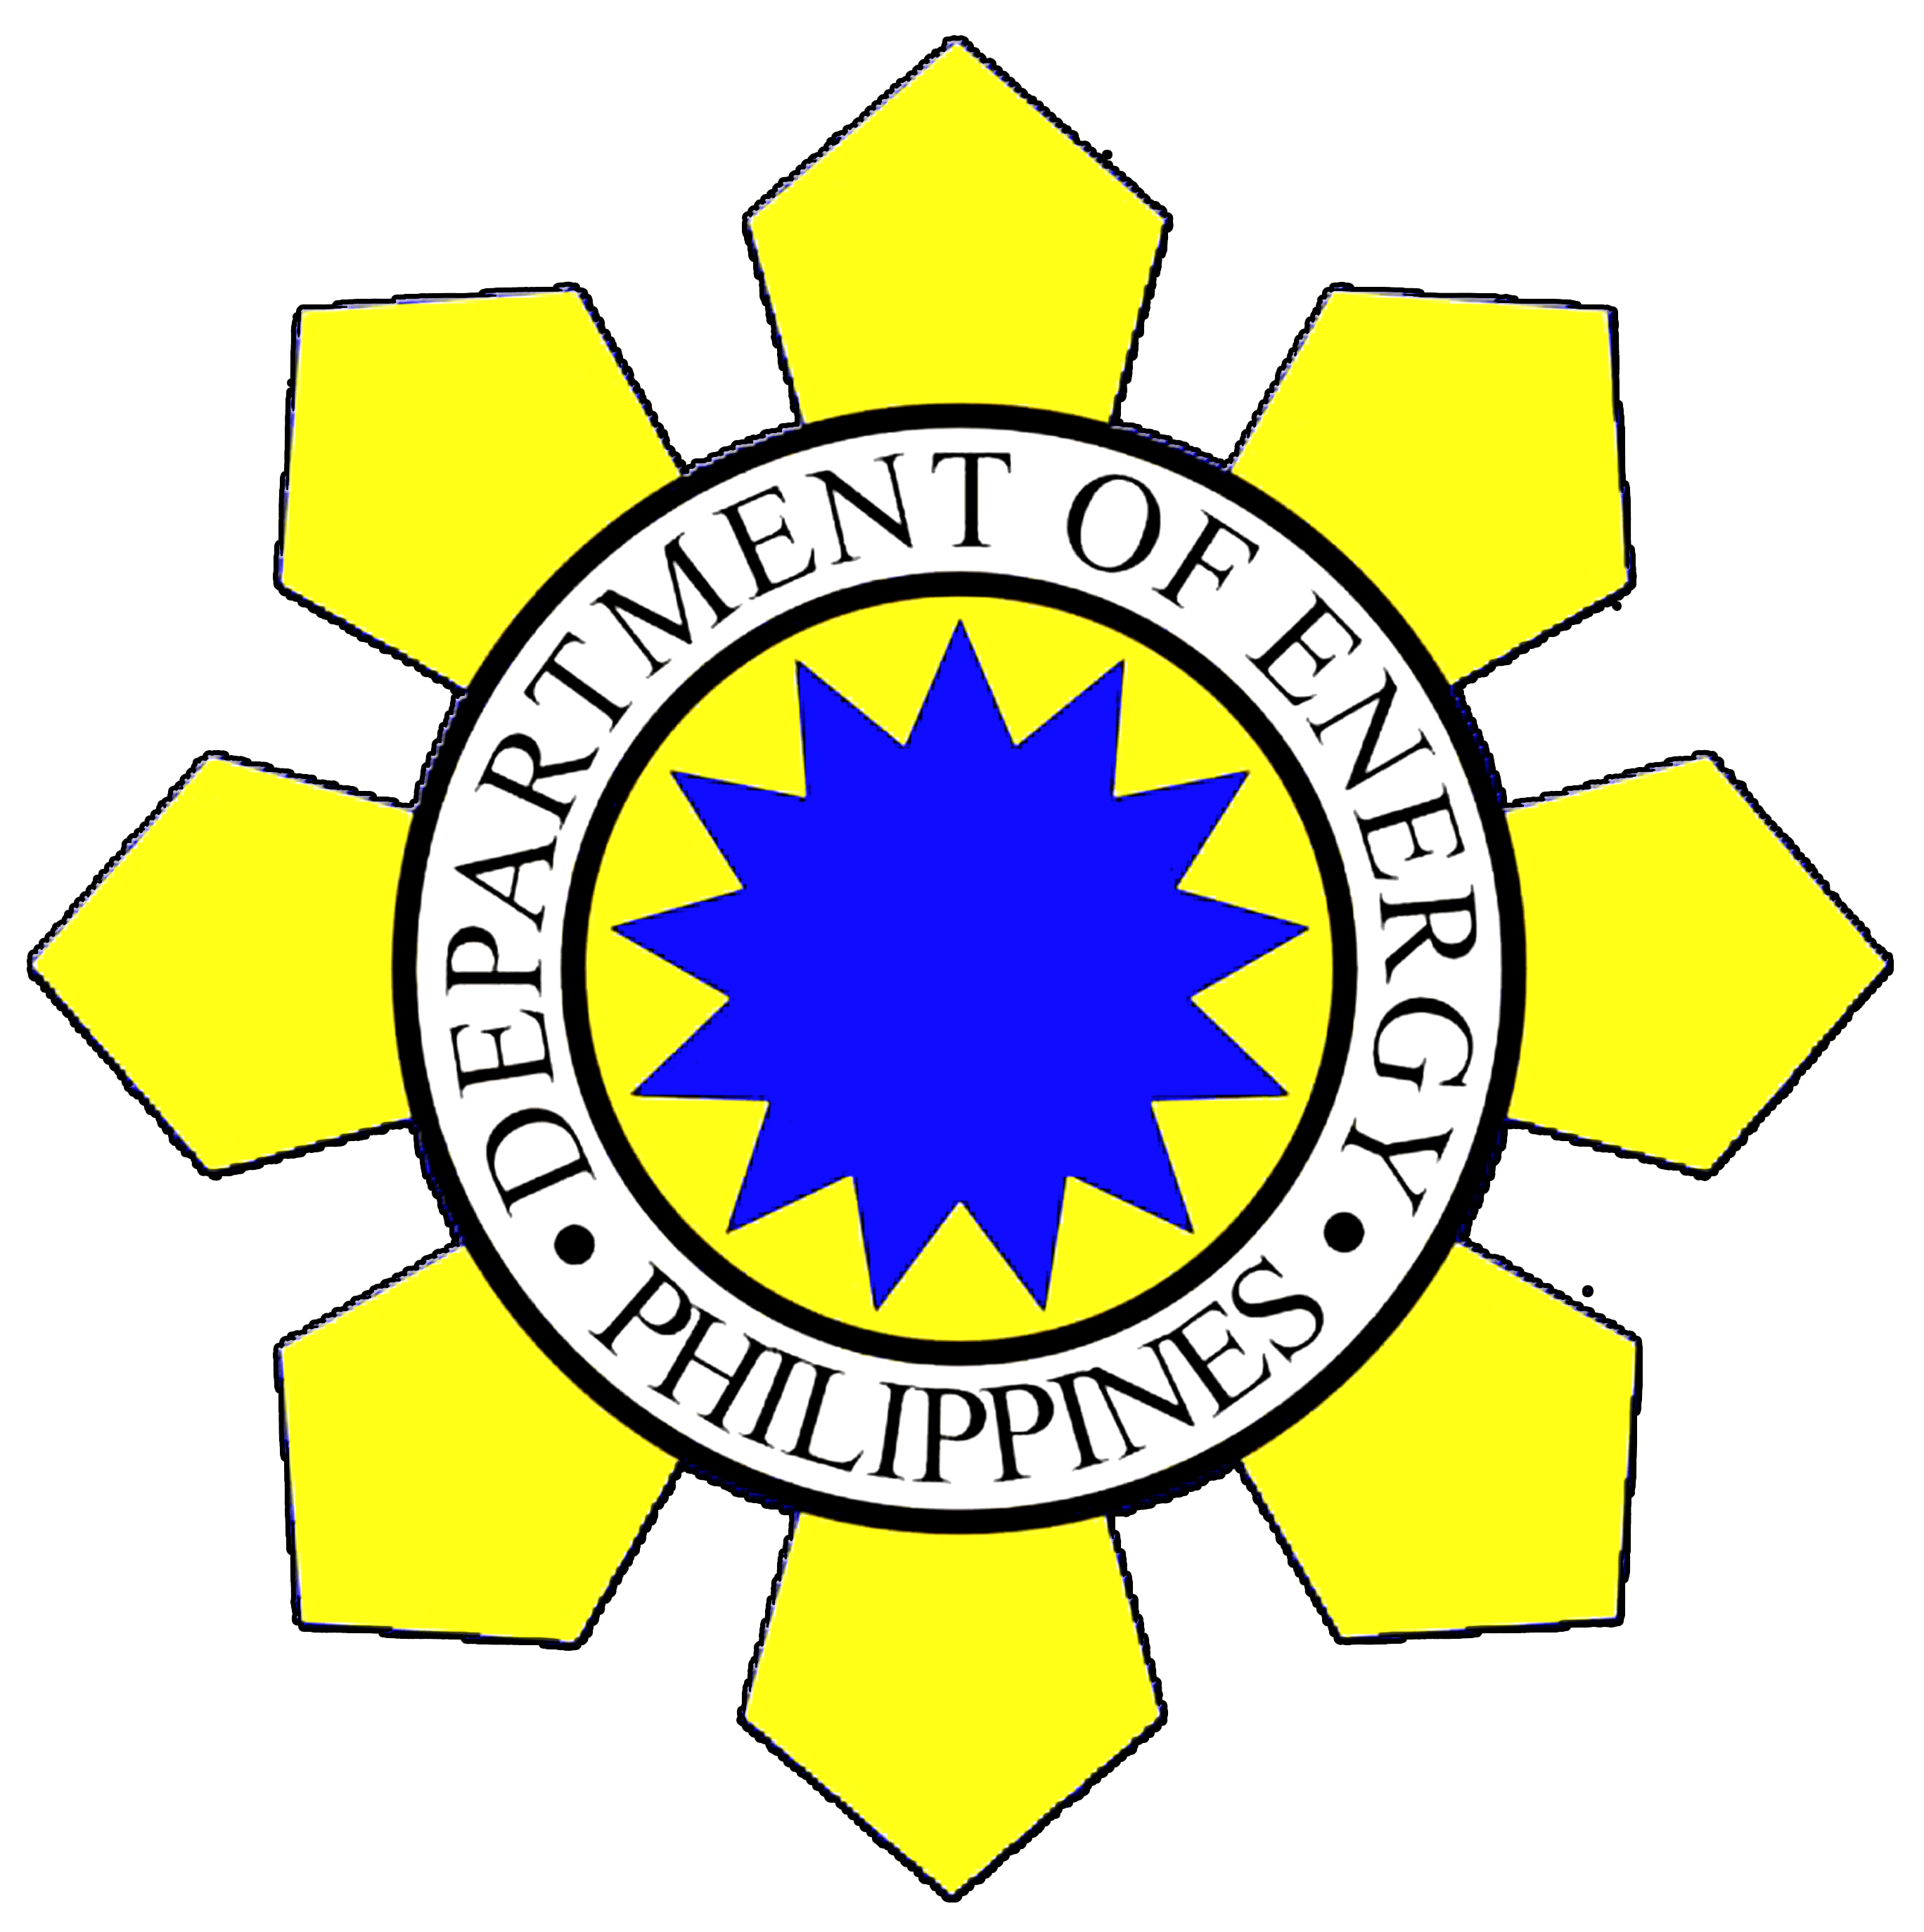 Department of Energy Logo - File:Department of Energy.png - Wikimedia Commons